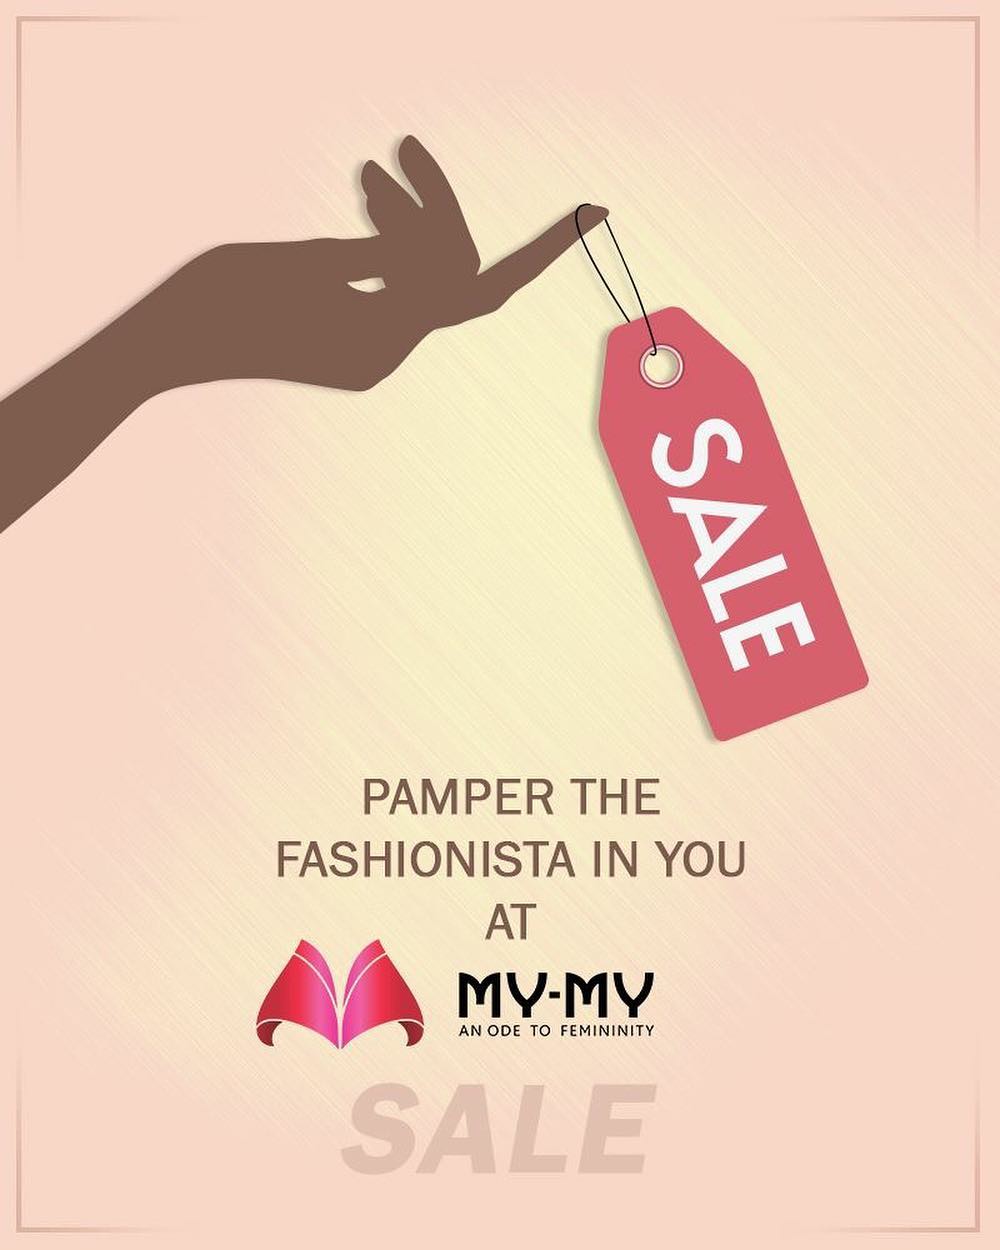 Sale season spells indulgence. Are you shopping at My-My sale this weekend?

#MYMYSale #MyMy #MyMyAhmedabad #Fashion #Ahmedabad #FemaleFashion